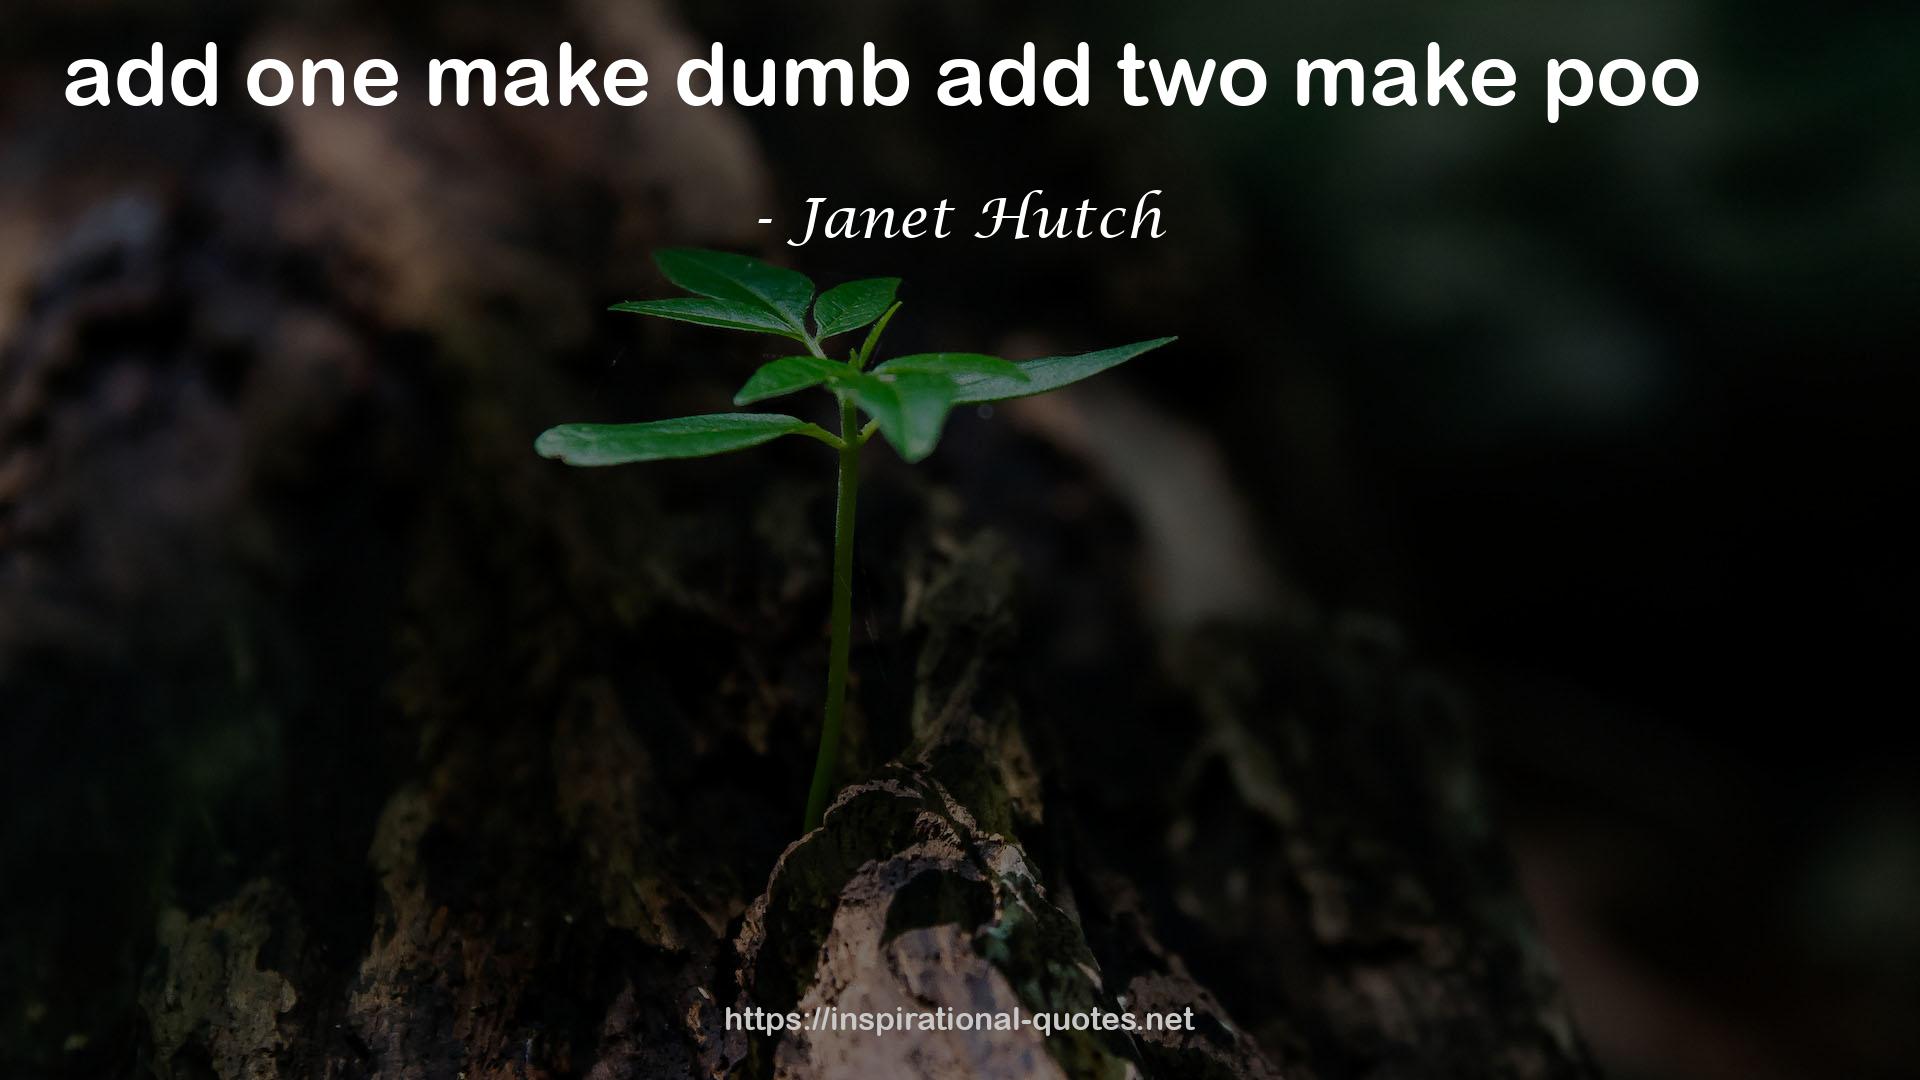 Janet Hutch QUOTES